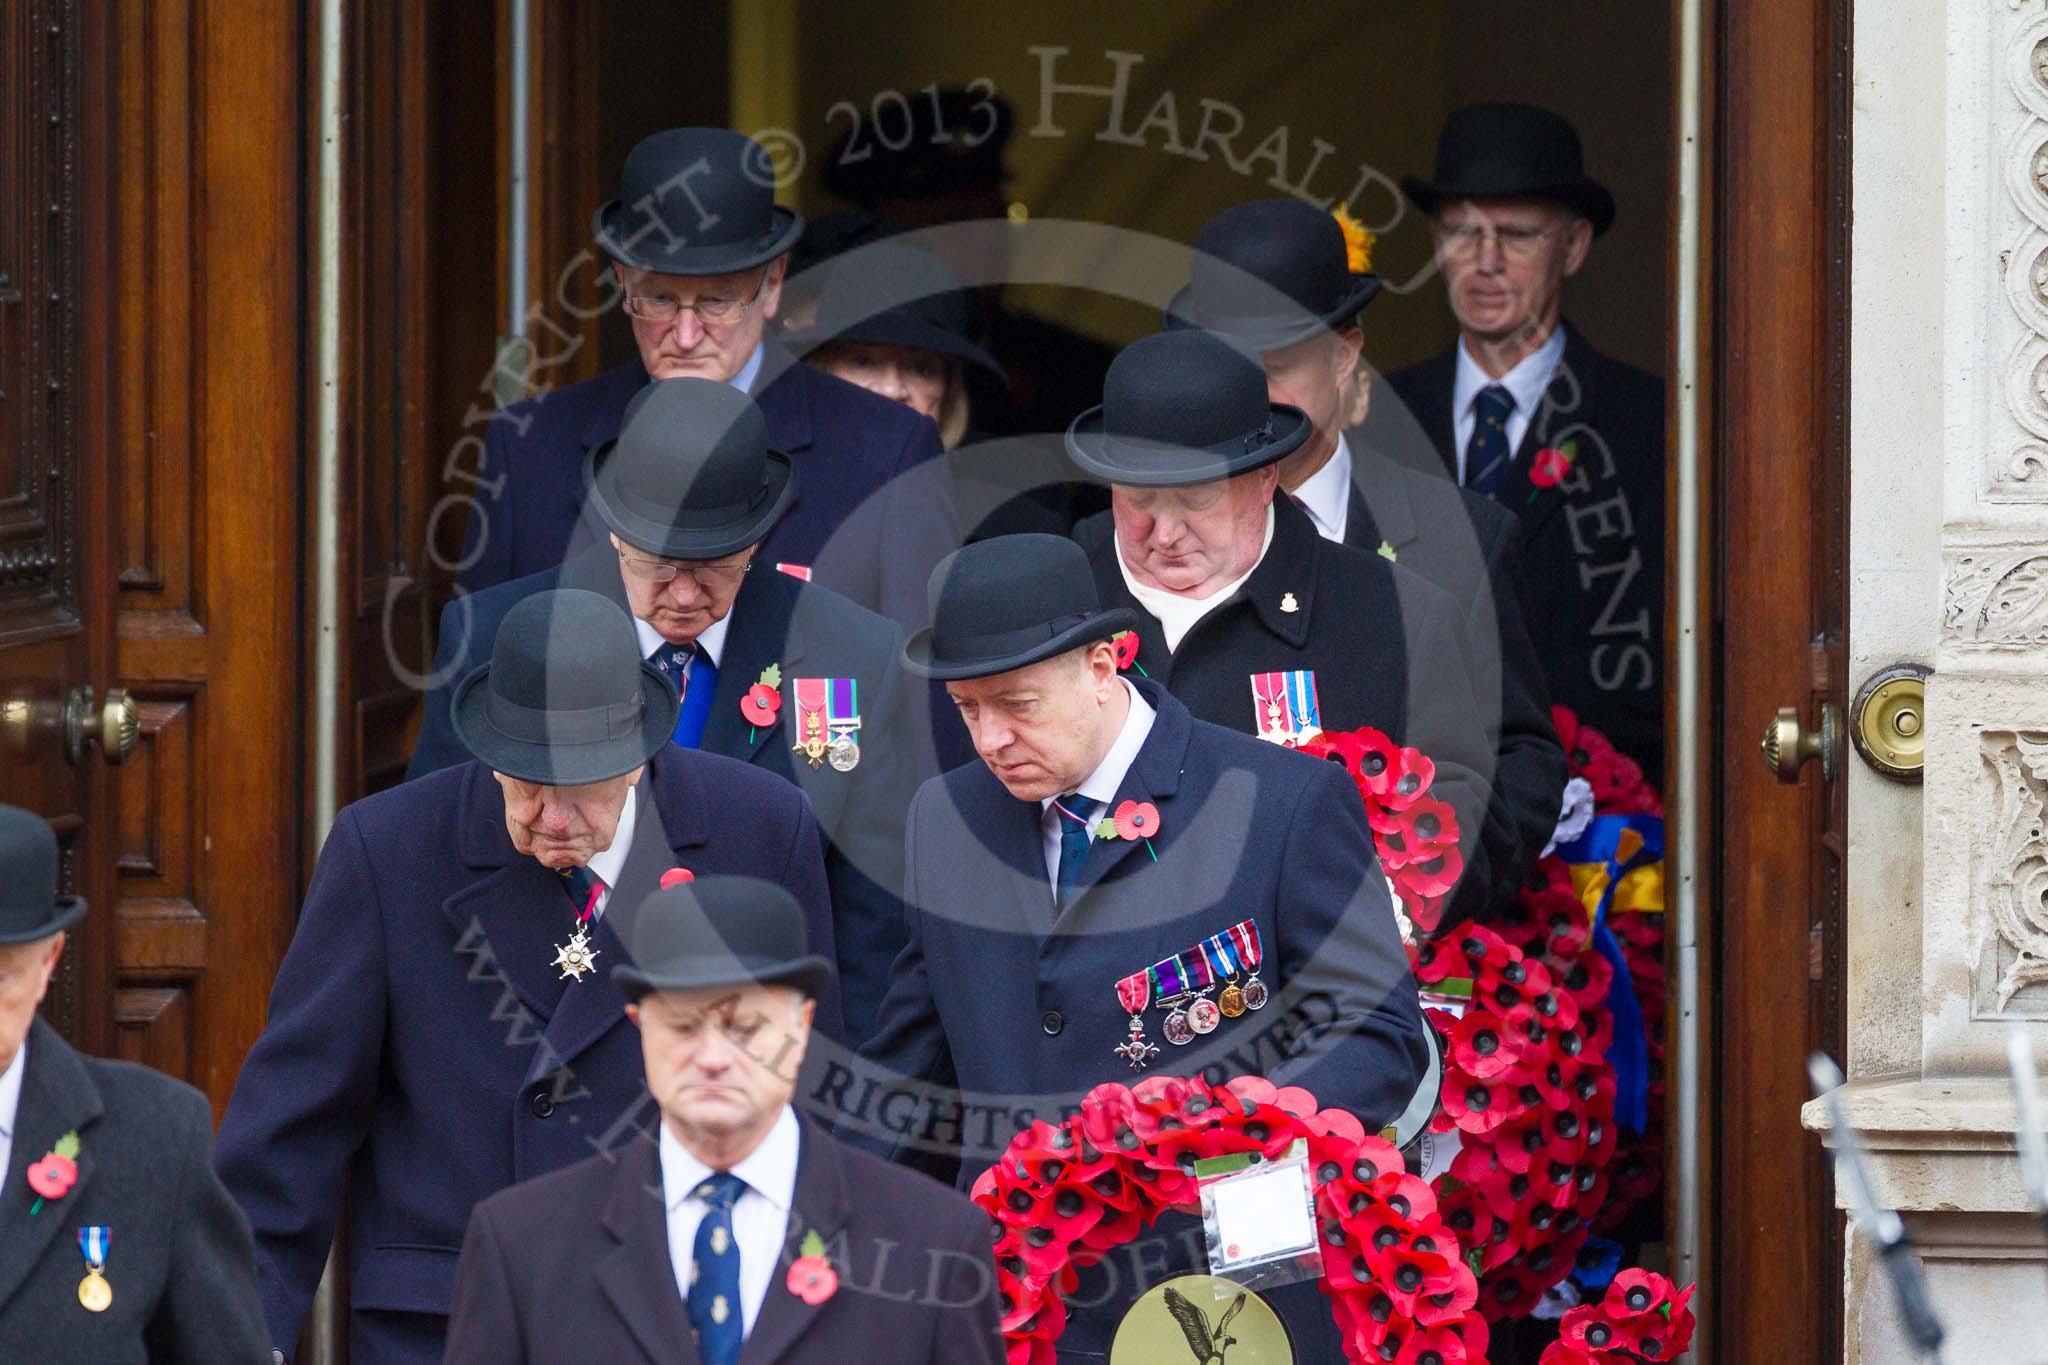 Remembrance Sunday at the Cenotaph 2015: Leading members of the Royal British Legion, the Royal Air Force Association, the Royal Navy Association, the Royal Commonwealth Ex-Services League and Transport for London leaving the Foreign- and Commonwealth Office. Image #64, 08 November 2015 10:40 Whitehall, London, UK